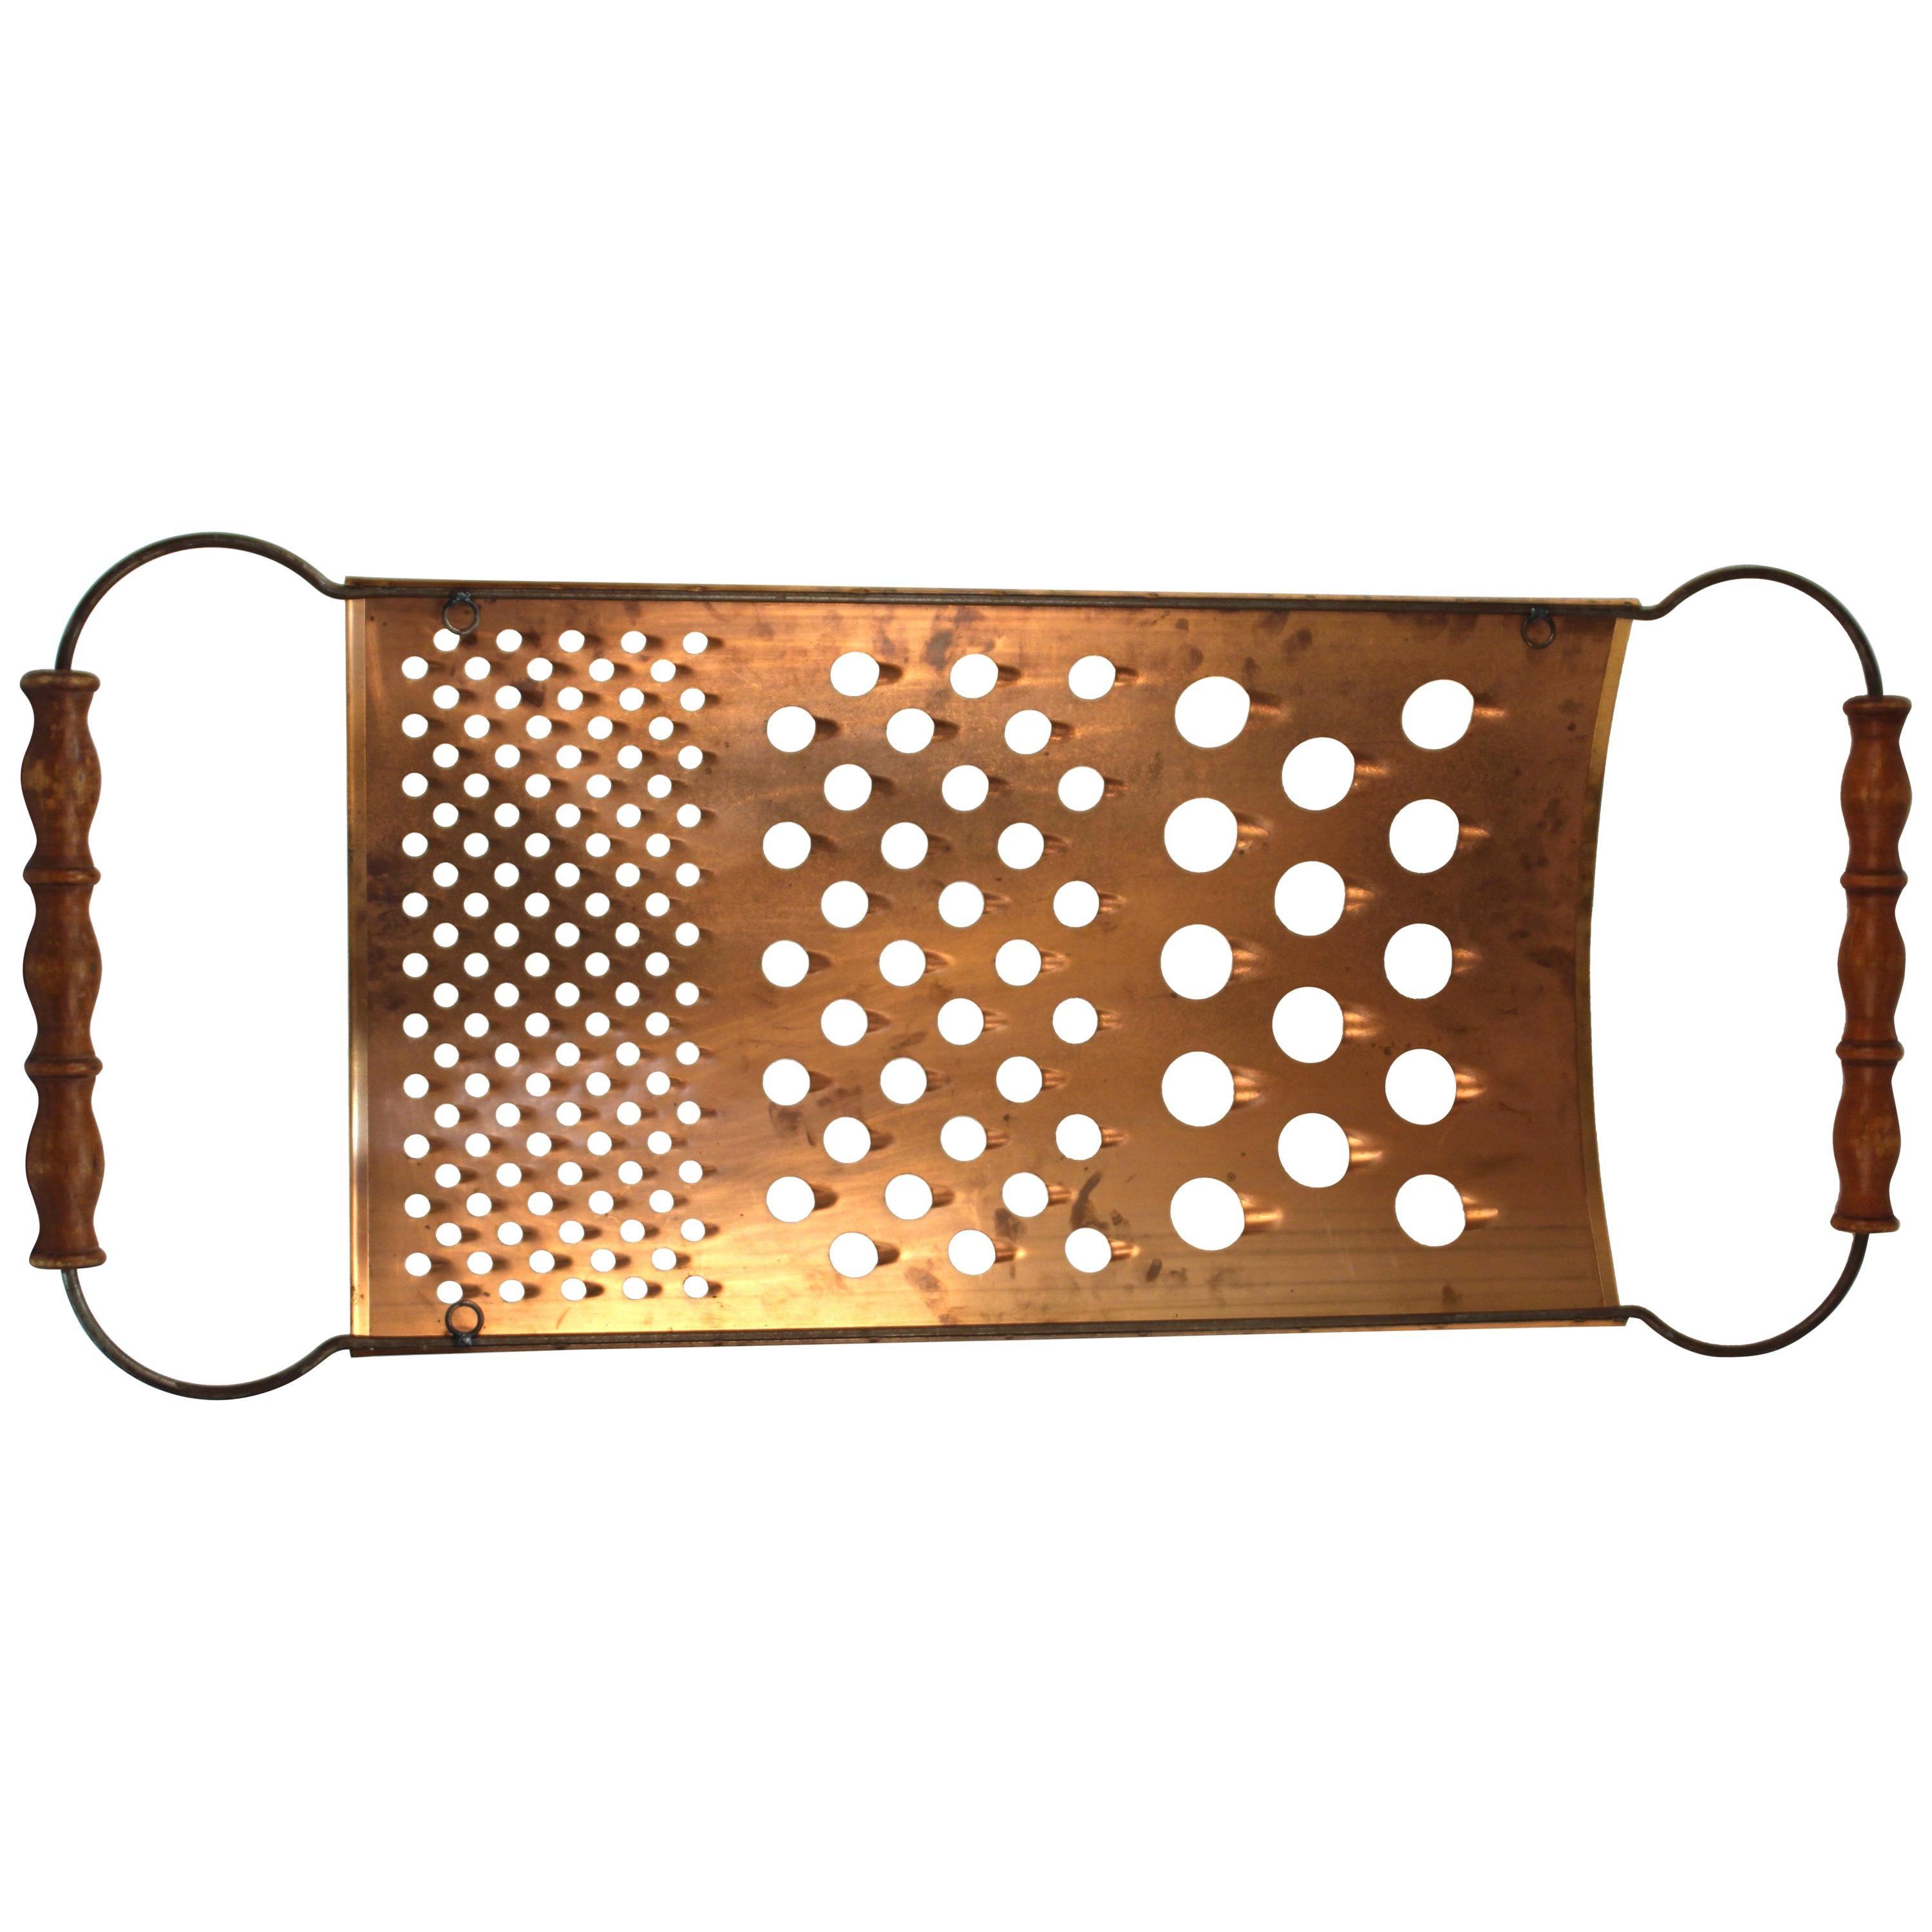 Curtis Jere Oversized Cheese Grater Wall Sculpture For Sale